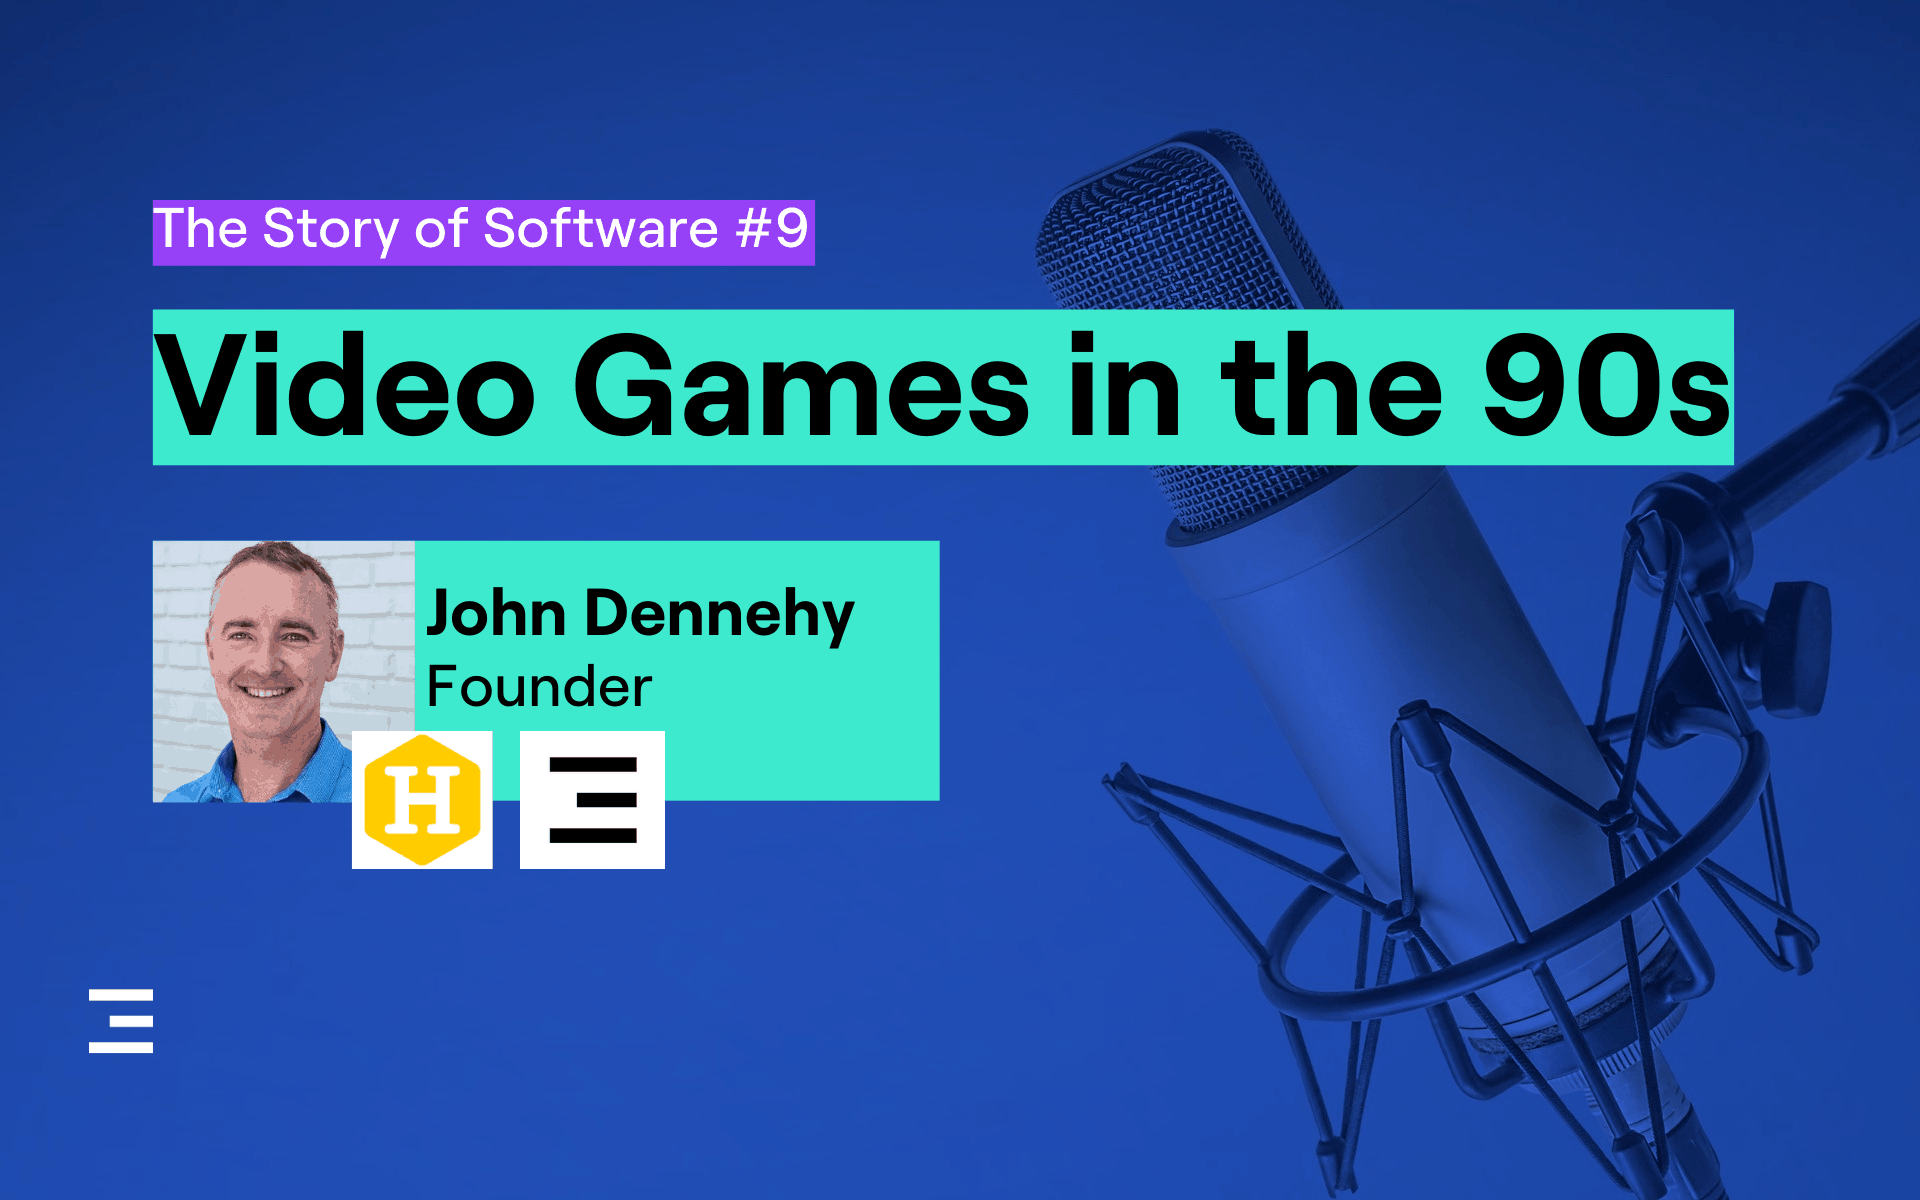 software podcast - story of software - video games in the 90s - episode 9